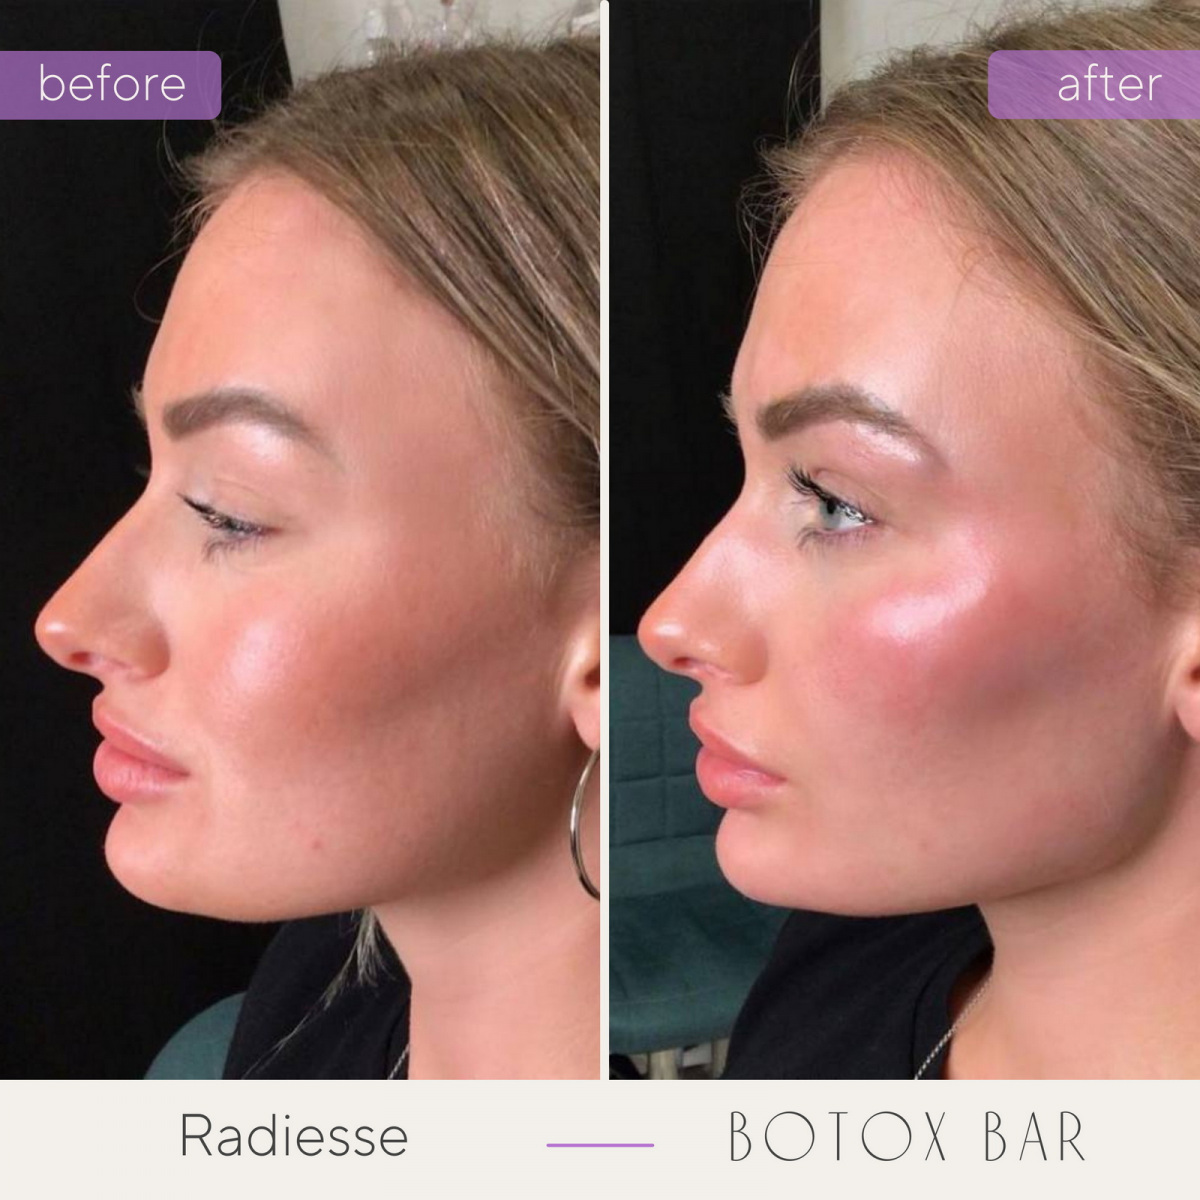 Before and After Radiesse treatment in The Botox Bar and Aesthetics at Dallas & Sherman, TX